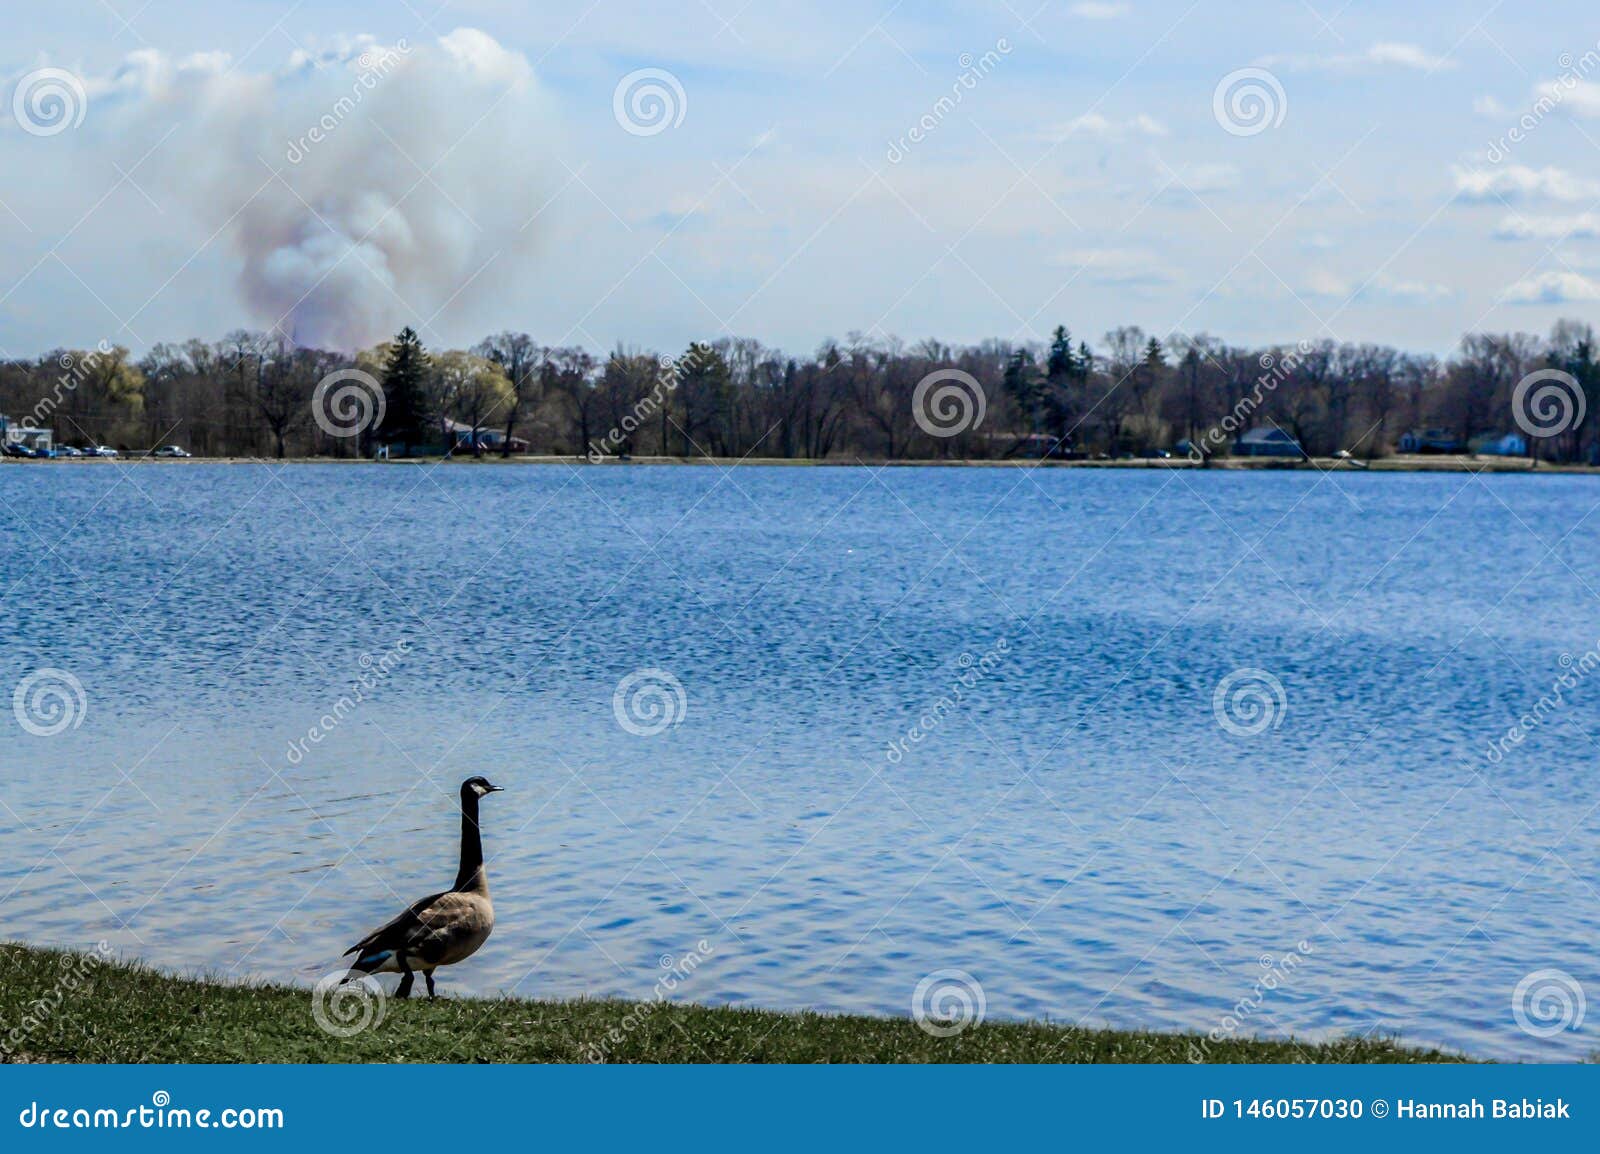 goose looking over pell lake, wisconsin with smoke cloud